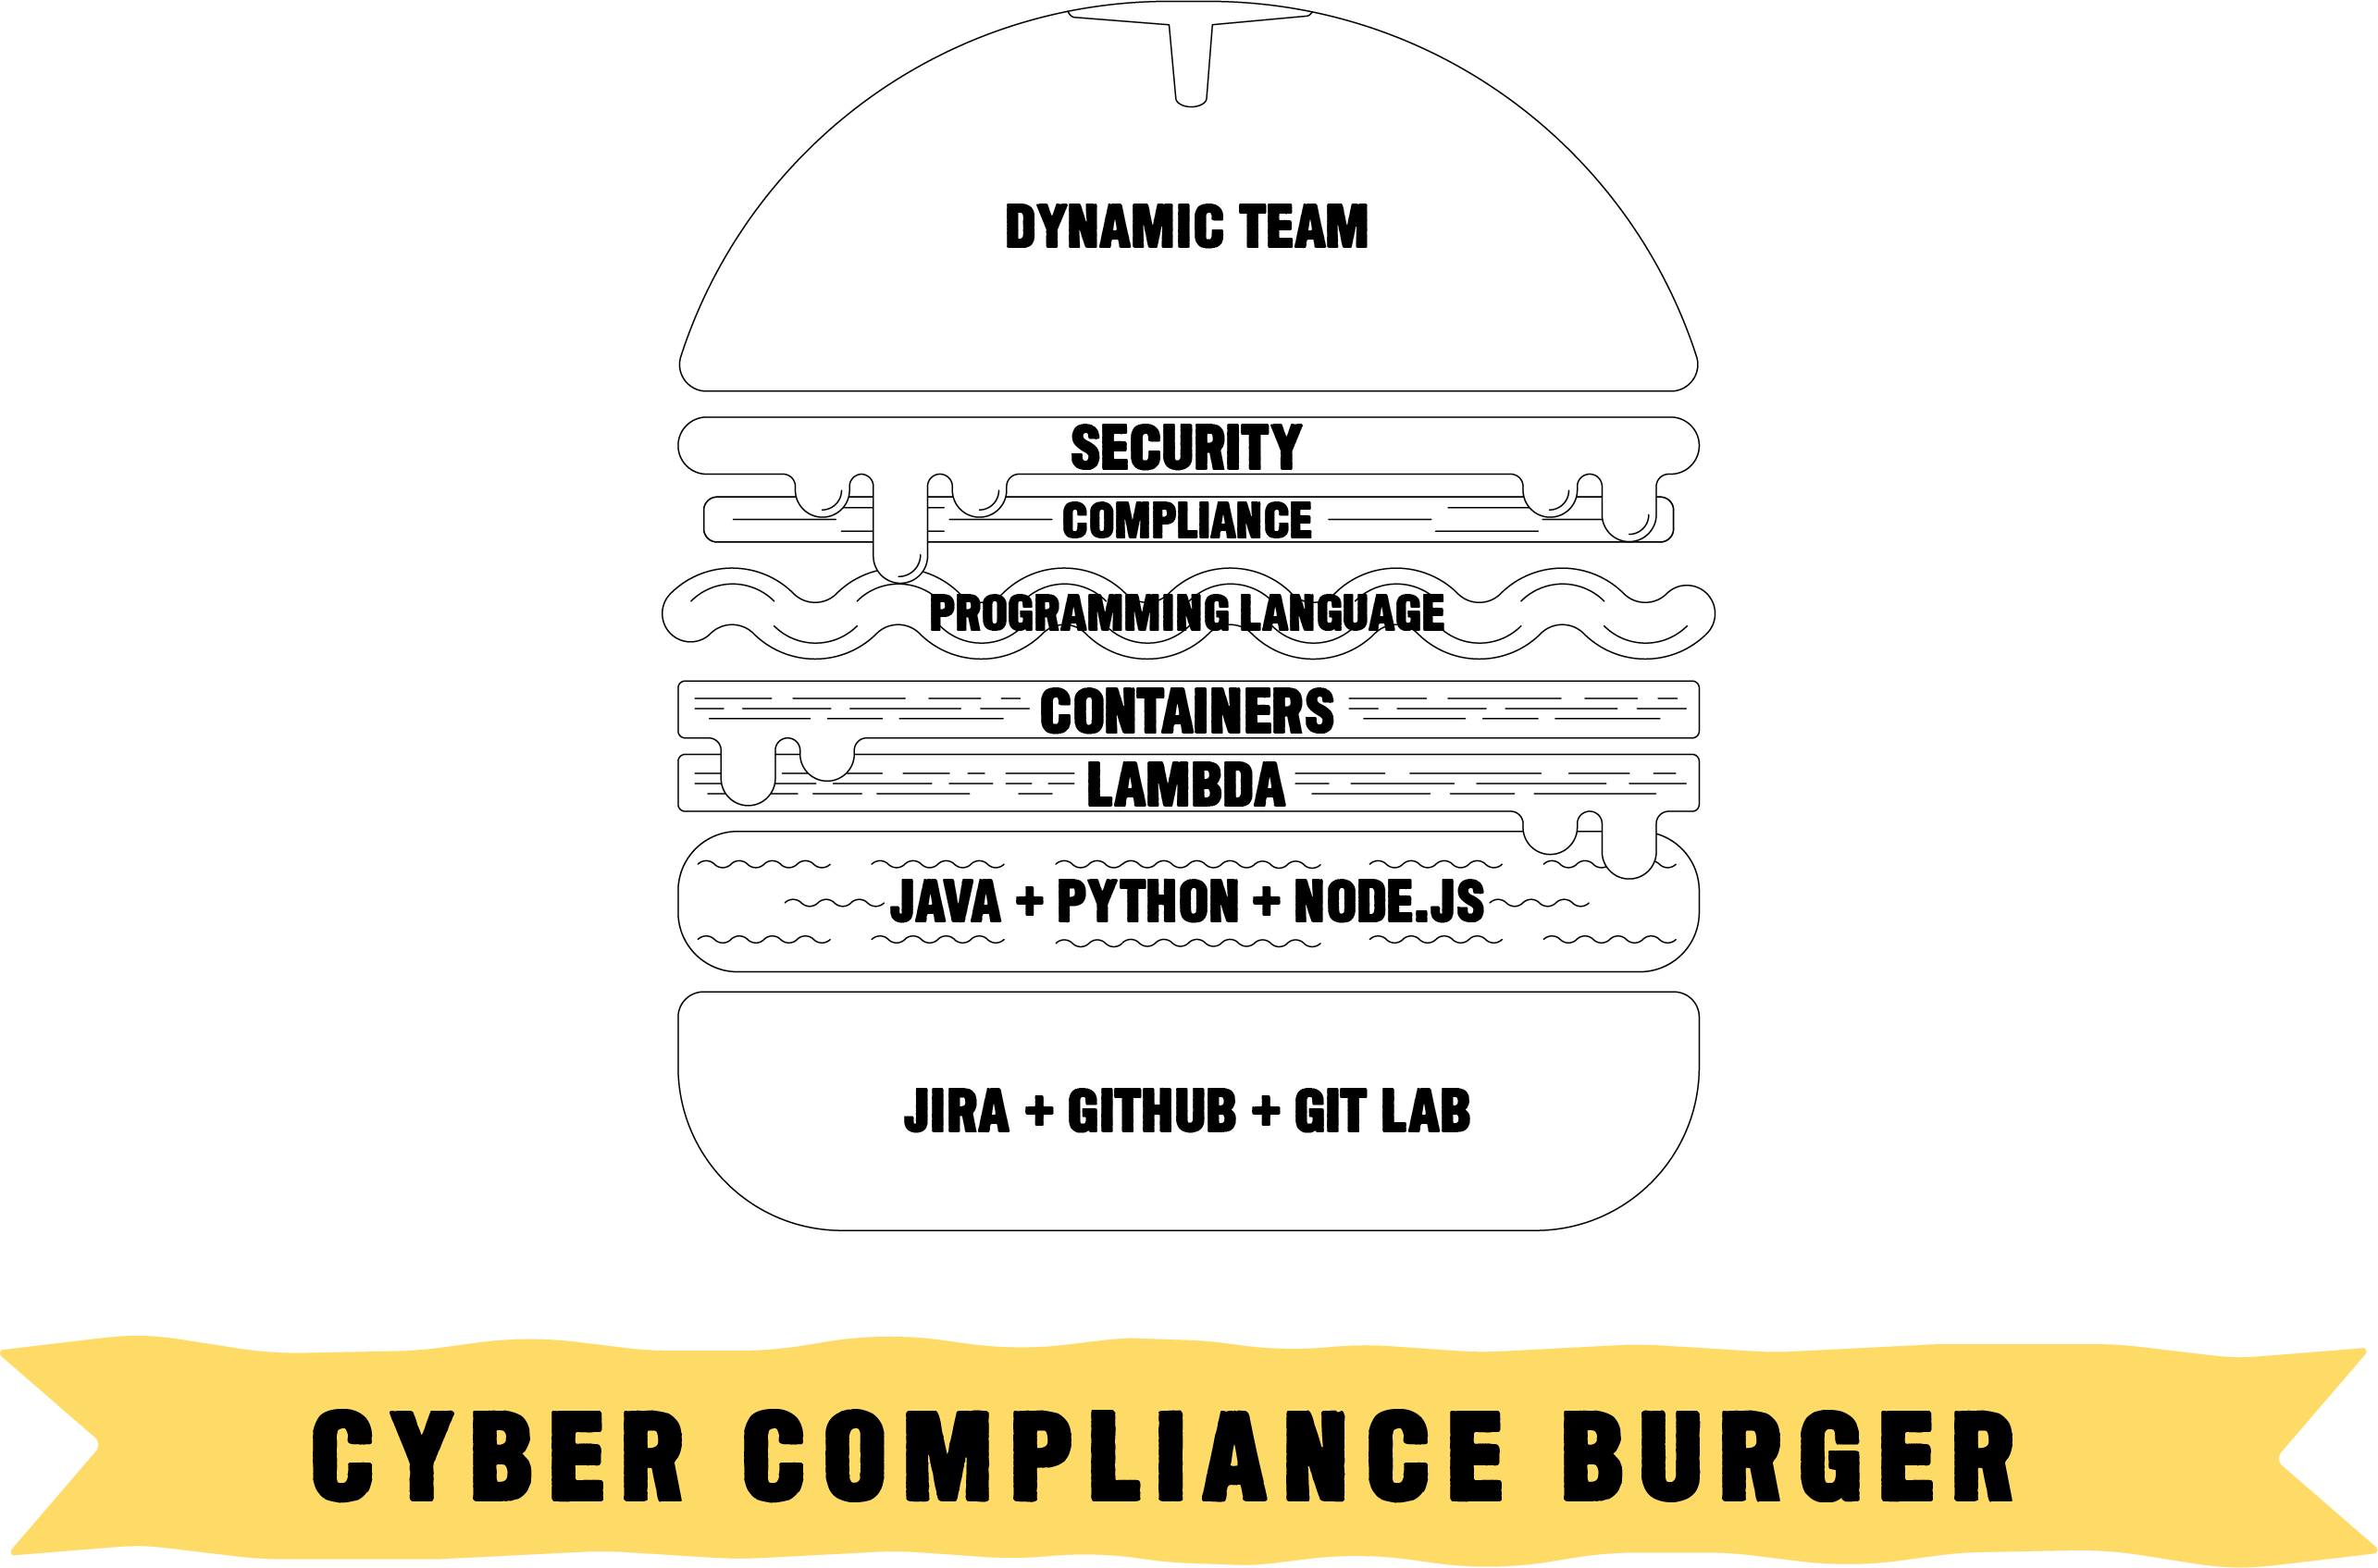 Cyver complience technology stack in the shape of a burger